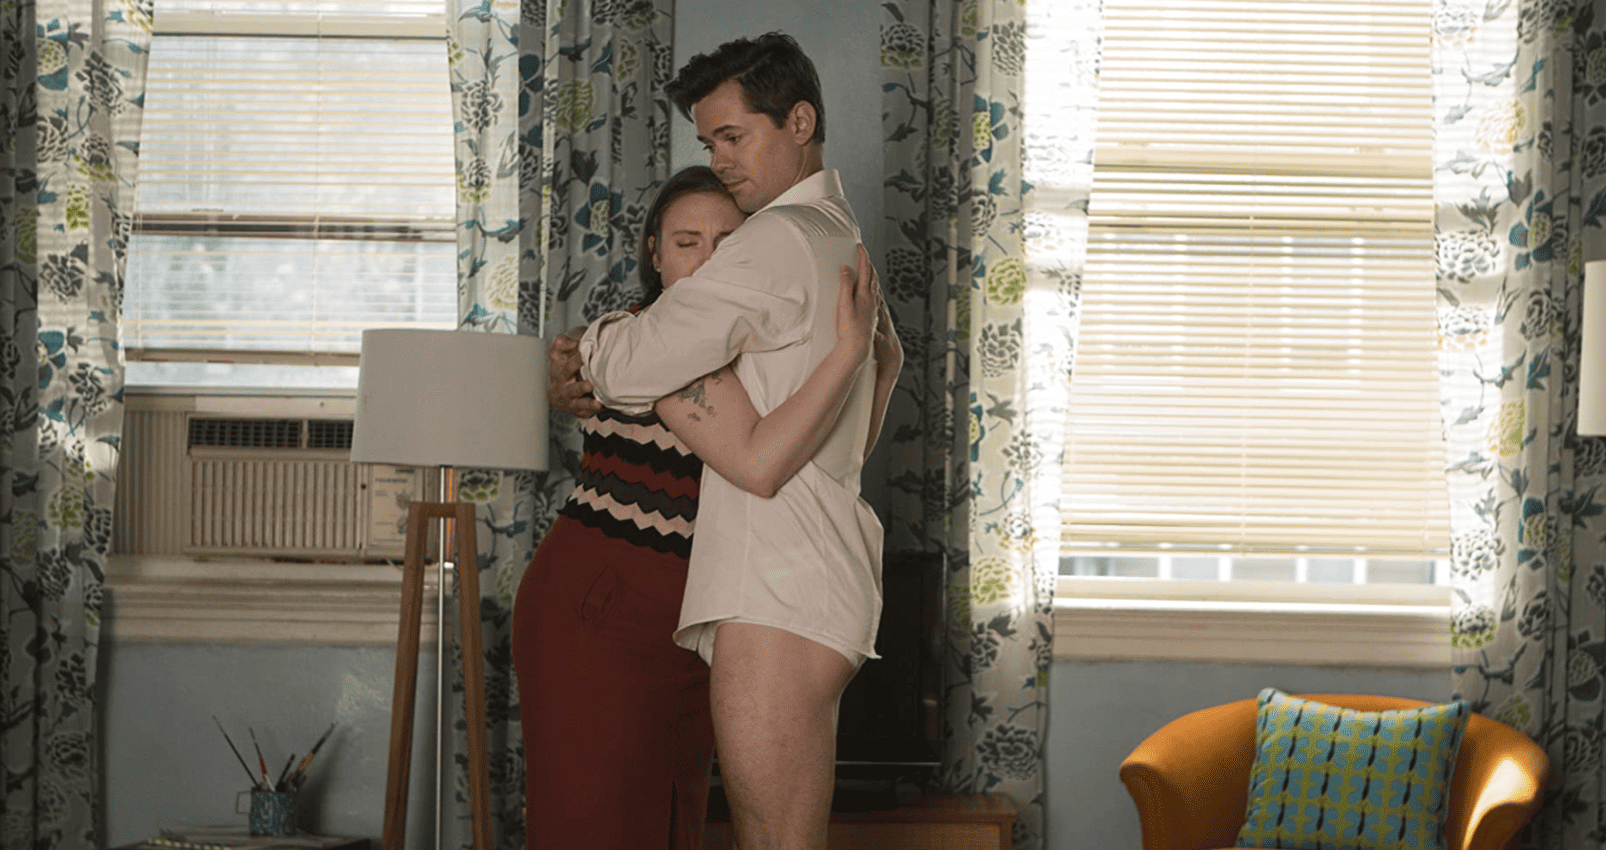 Elijah hugs his roommate Hannah in this adorable image from Apatow Productions